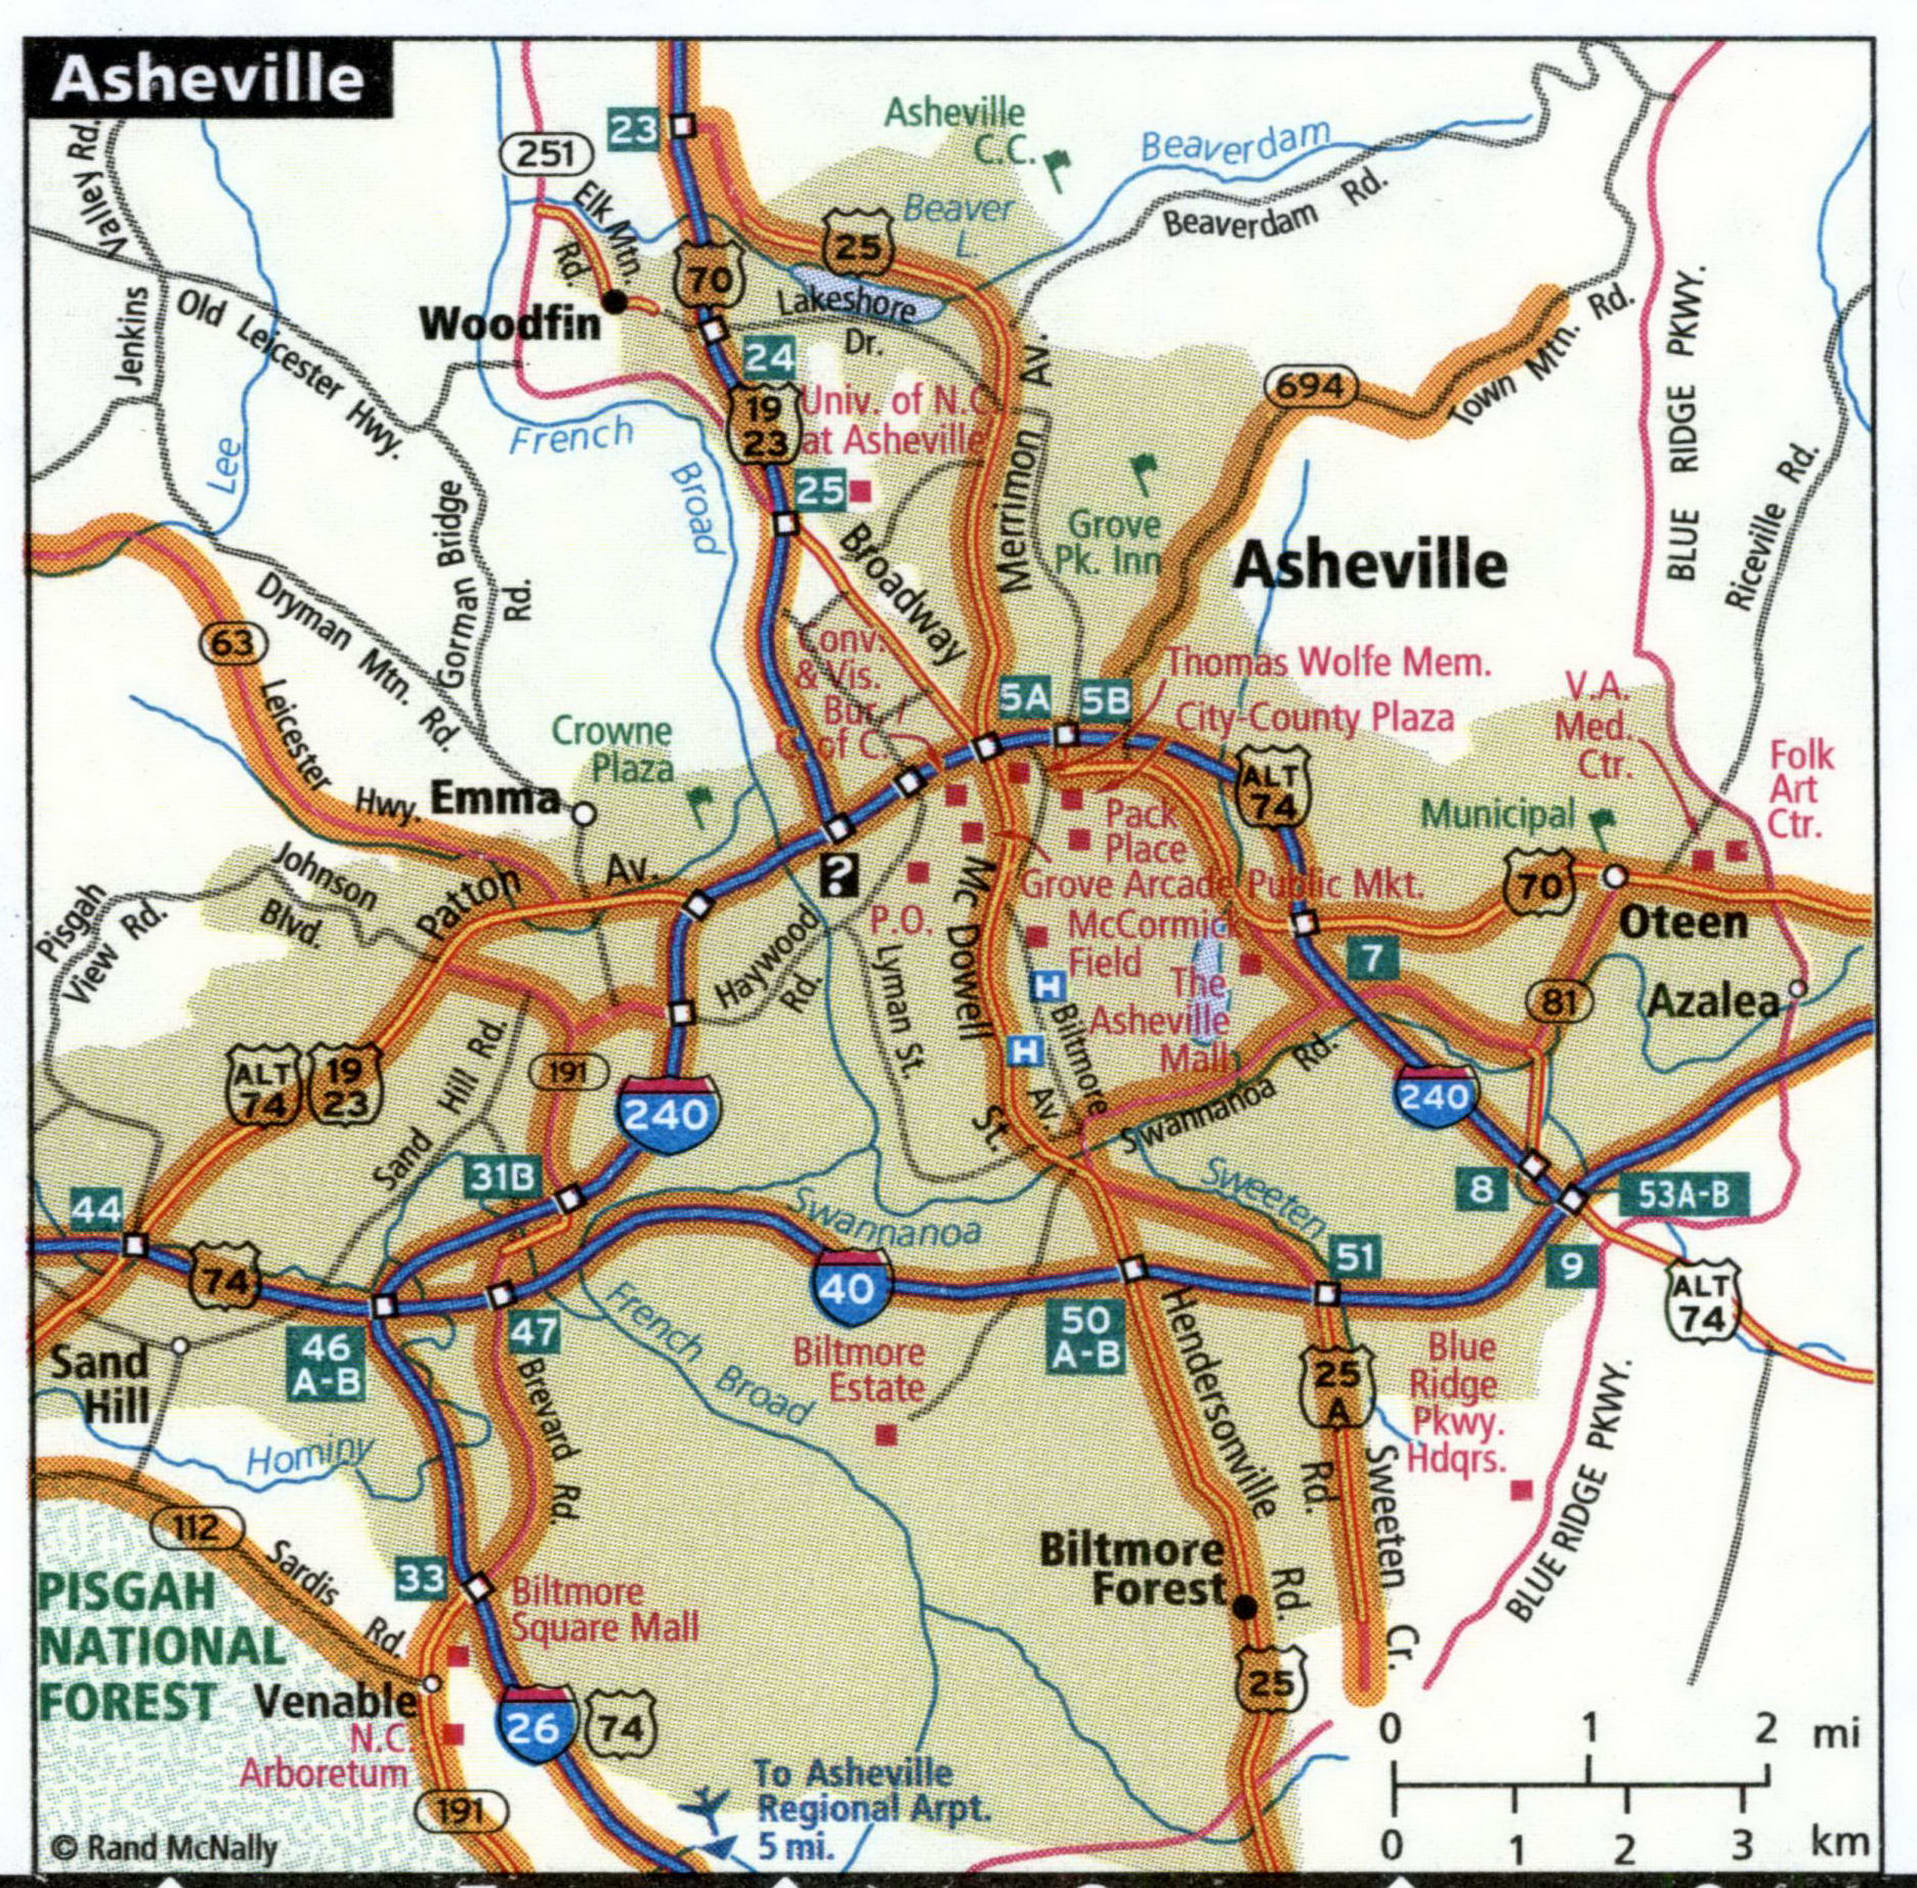 Asheville city map for truckers